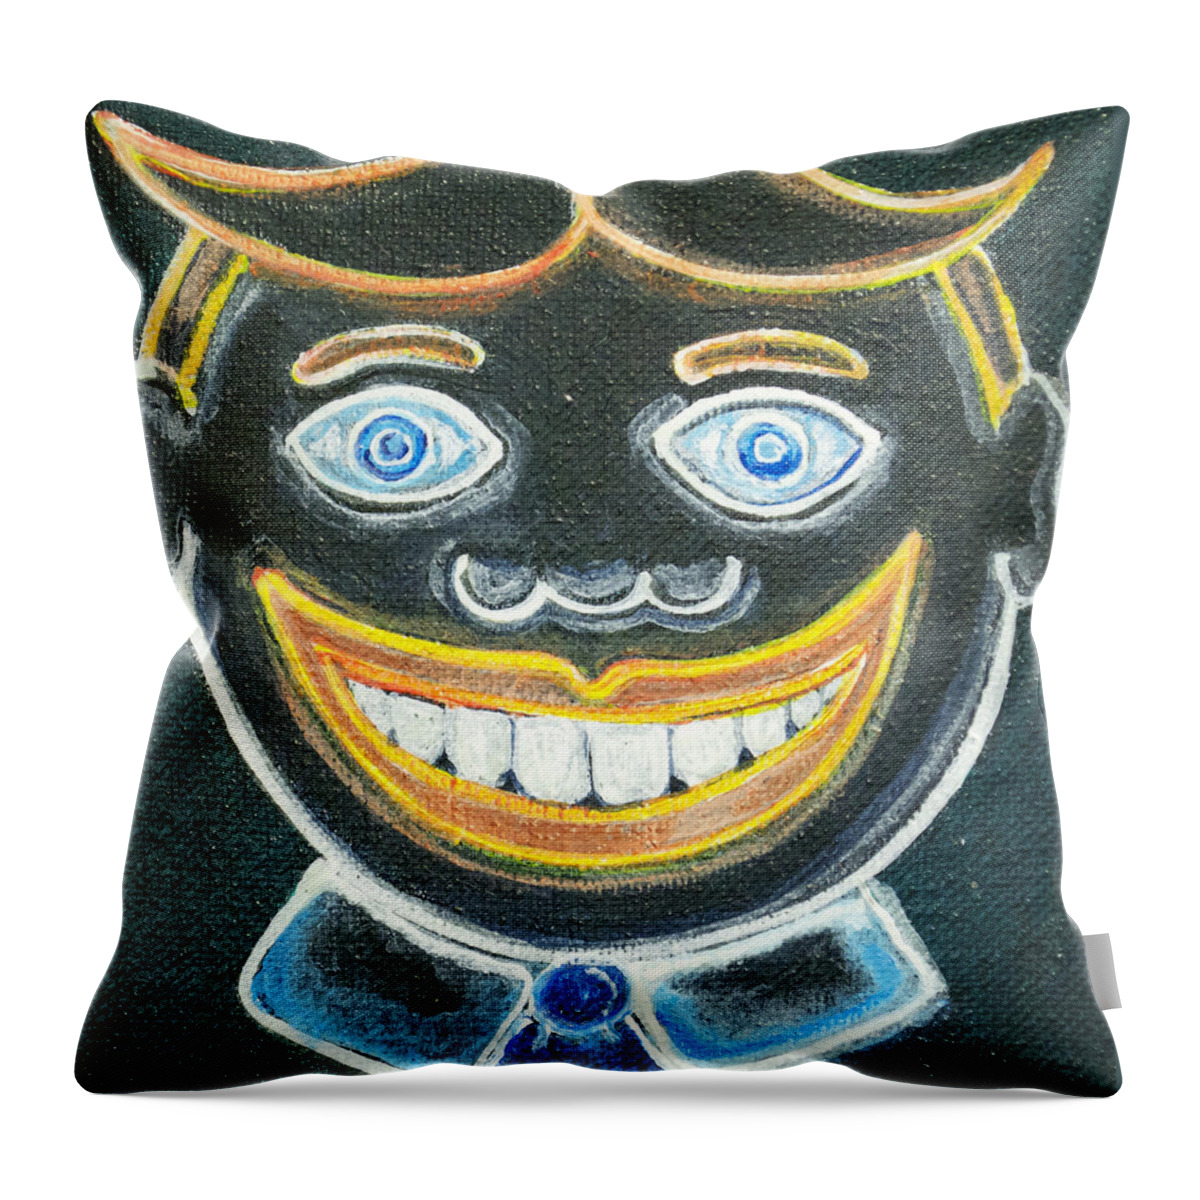 Tillie Of Asbury Park Throw Pillow featuring the painting Glow in the dark Tillie by Patricia Arroyo